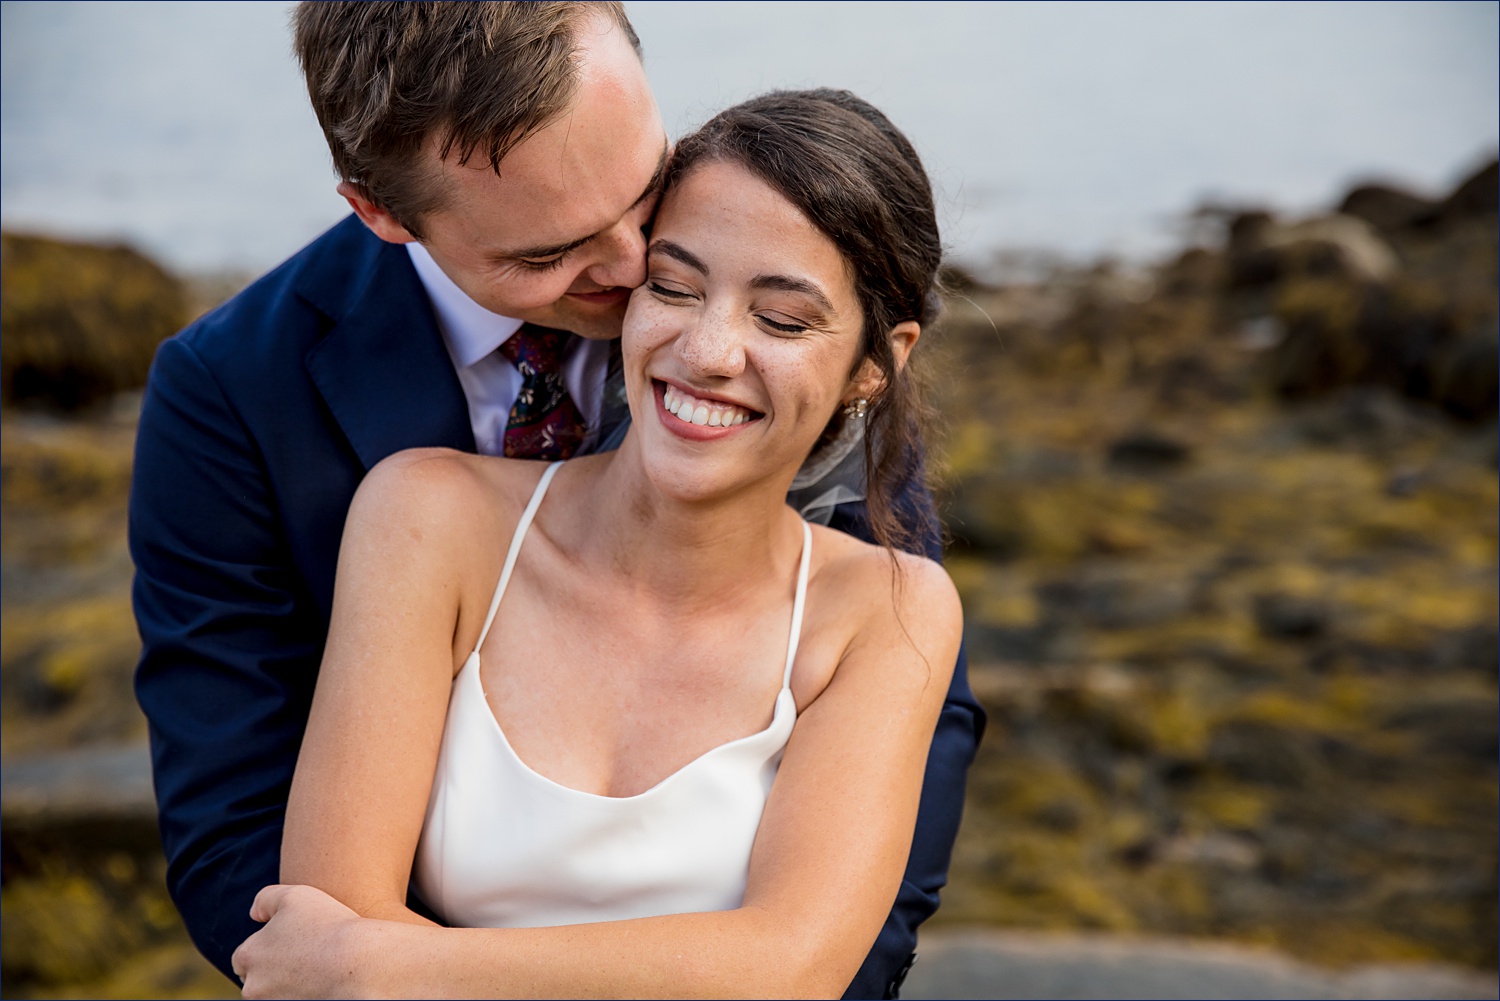 The couple laughs and hold each other close on their Deer Isle Maine wedding day